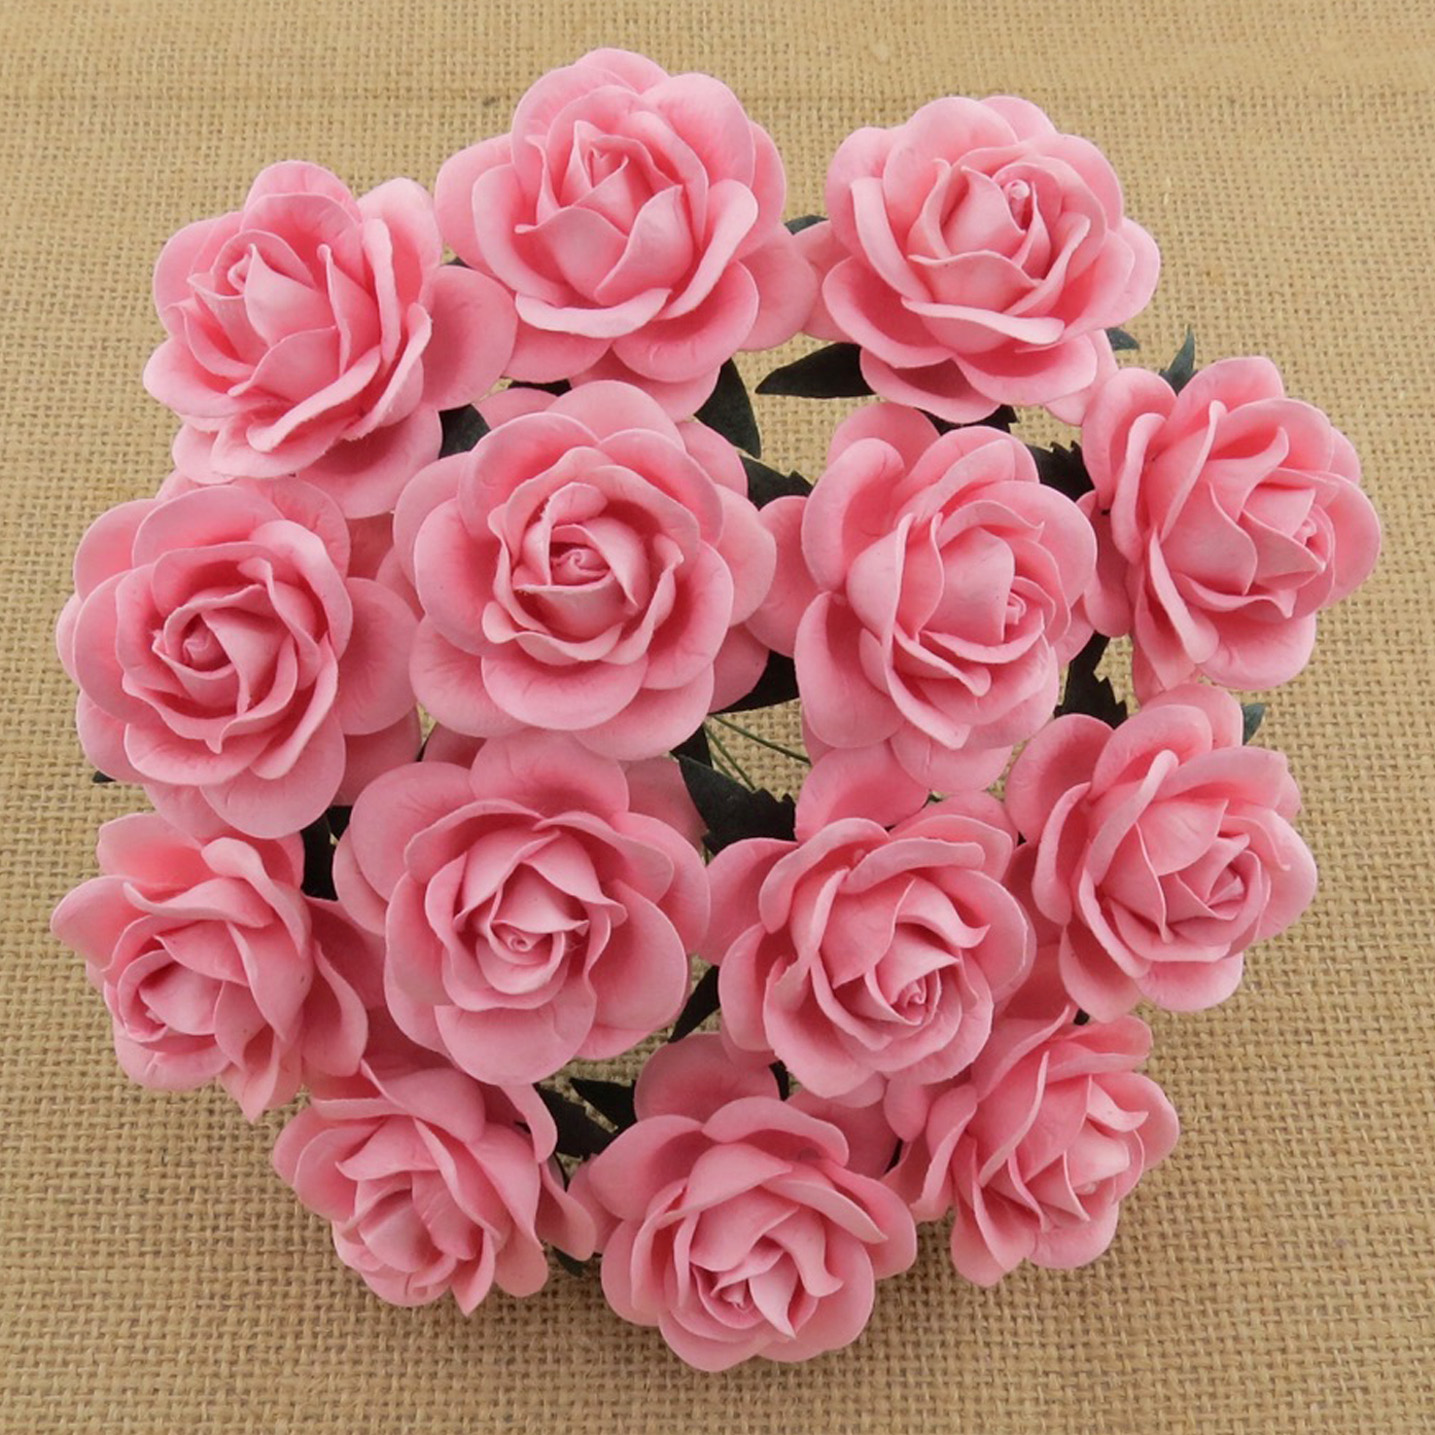 50 BABY PINK MULBERRY PAPER TRELLIS ROSES